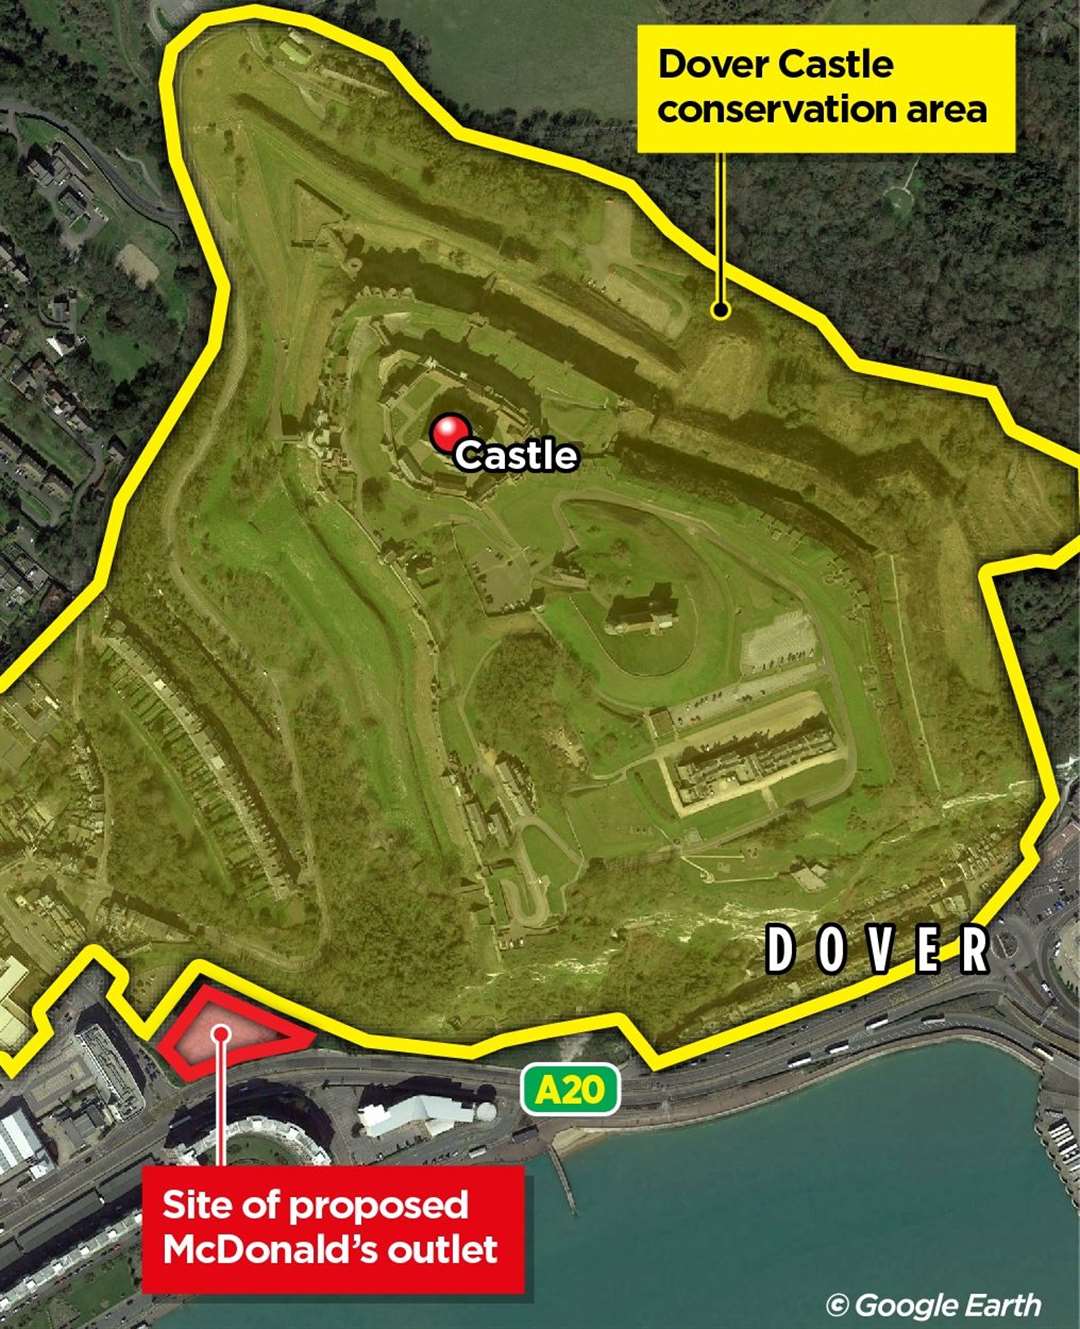 The proposed site lies just outside the Dover Castle conservation area